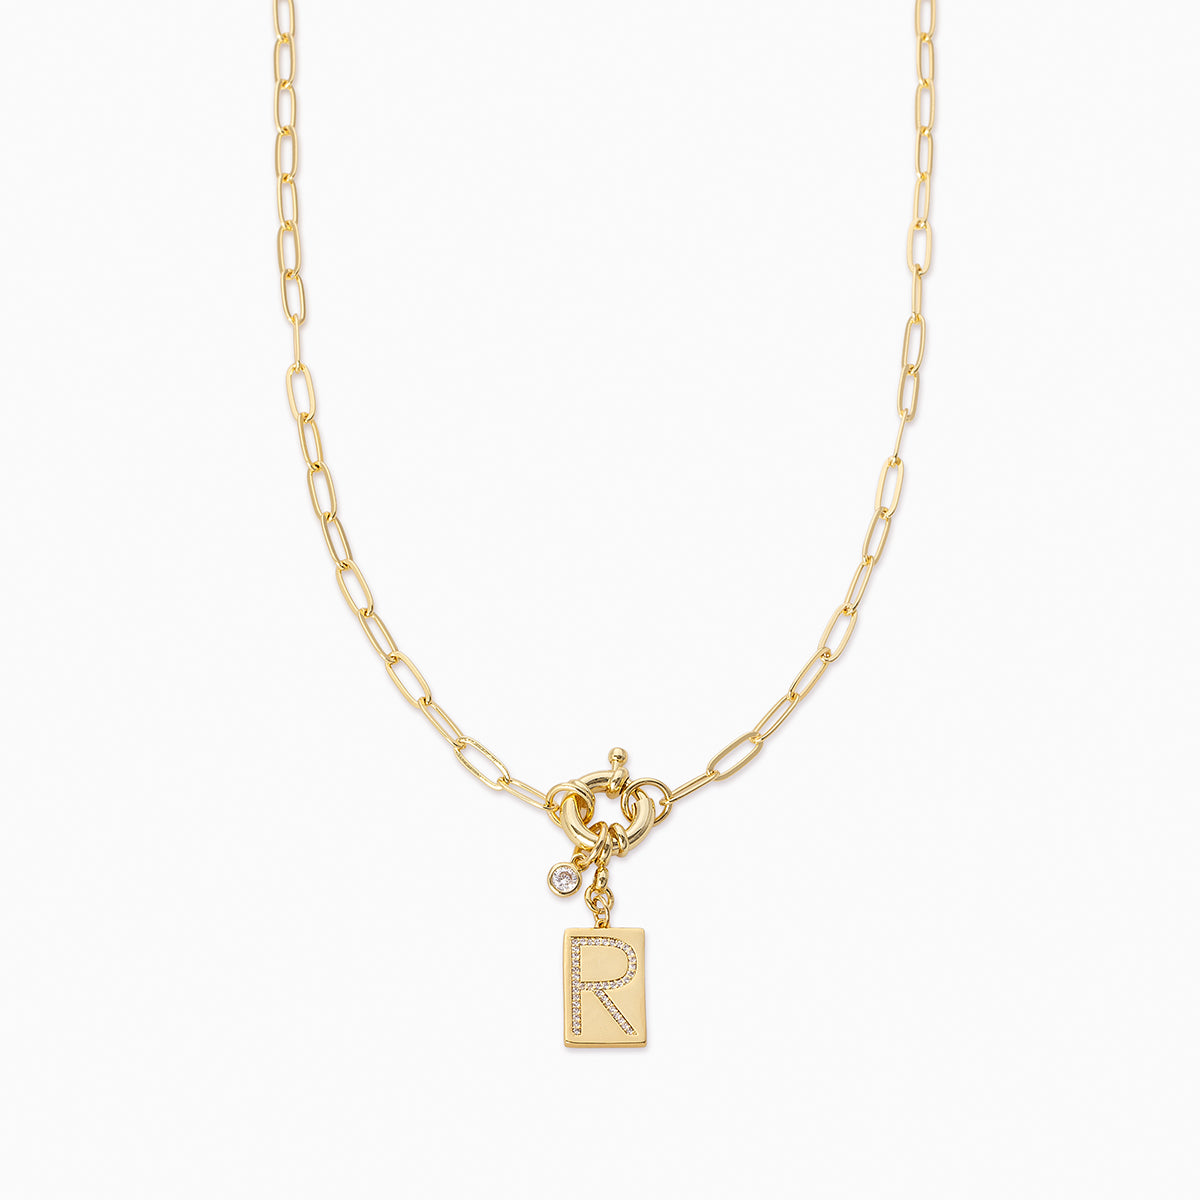 Gold Letter Pendant Necklace with Letter R | Sur 2.0 Initial Jewelry | Women's Jewelry by Uncommon James